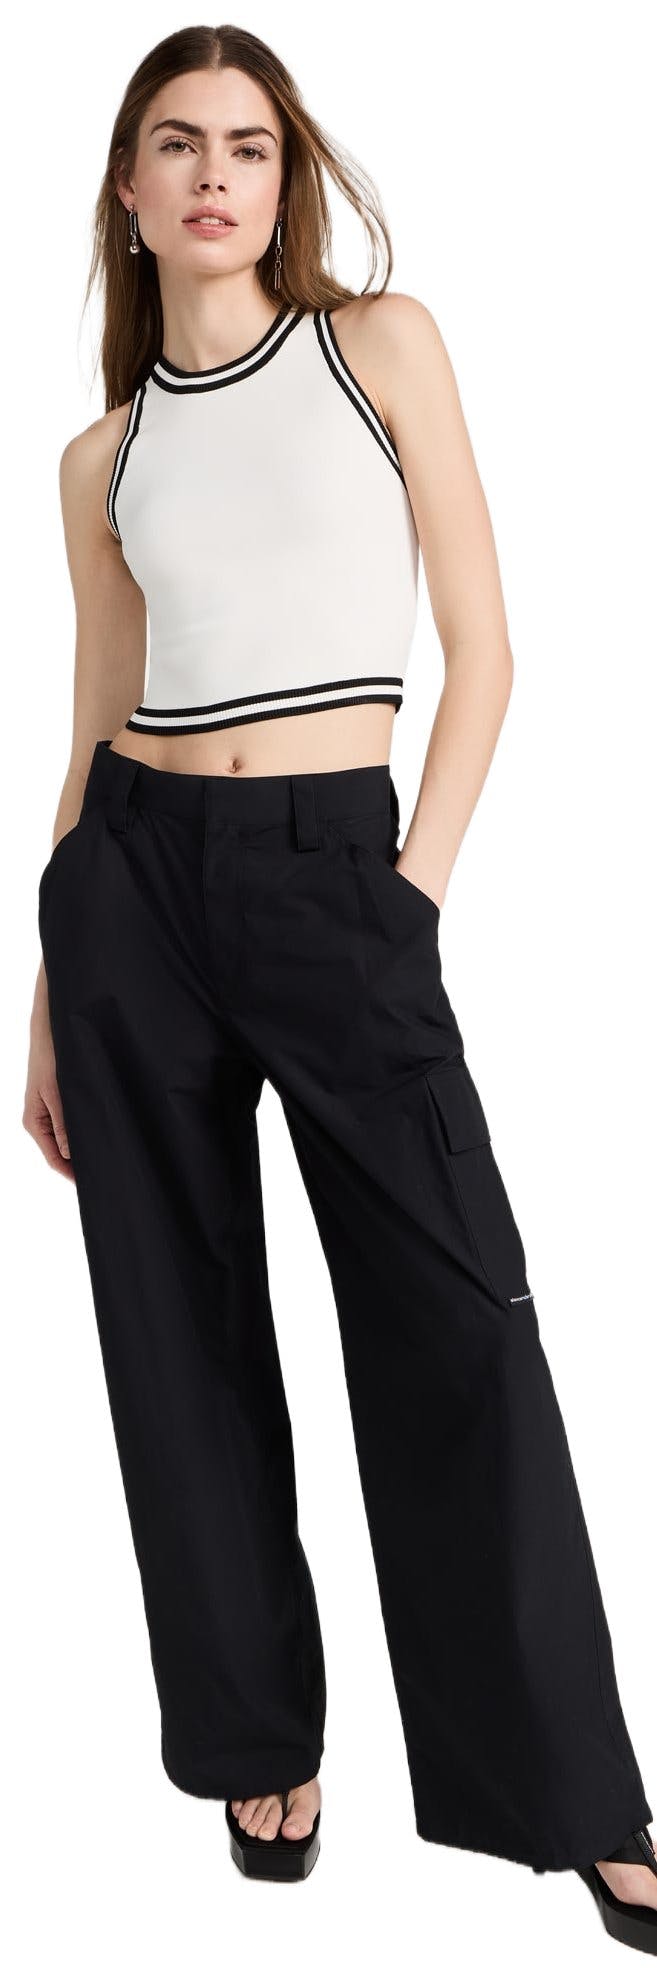 alice + olivia Rydel Tipped Cropped Tank alice + olivia Rydel Tipped Cropped Tank Shop The Look alice + olivia Rydel Tipped Cropped Tank  shopbop